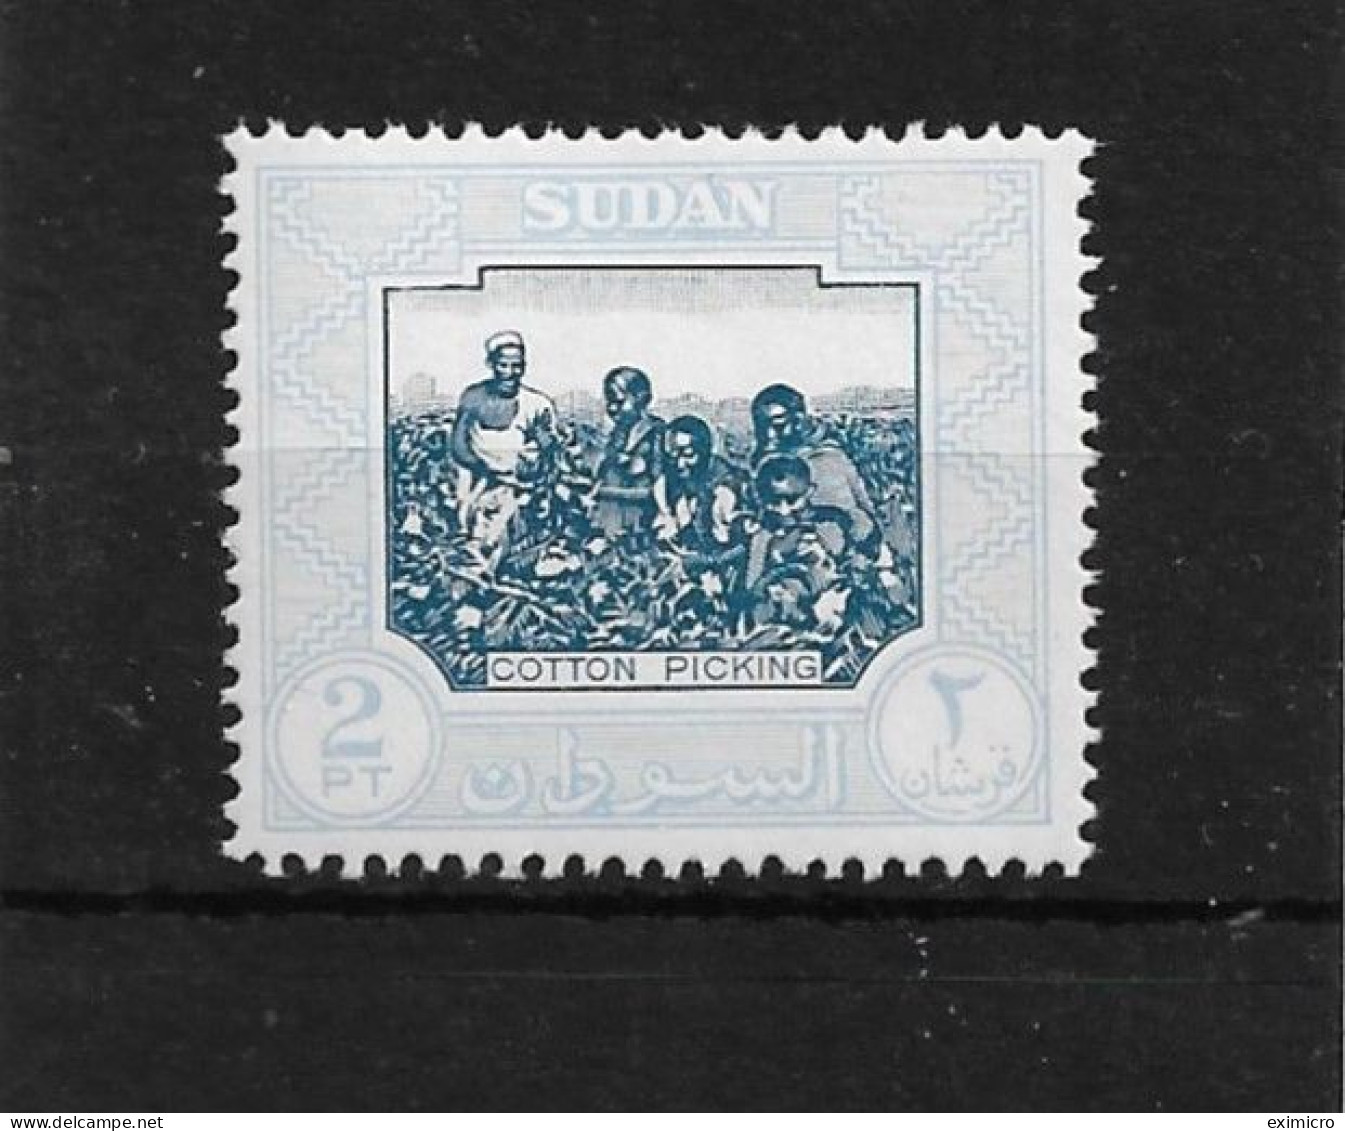 SUDAN 1951 - 1961 2p SG 130a DEEP BLUE AND VERY PALE BLUE UNMOUNTED MINT Cat £12 - Sudan (...-1951)